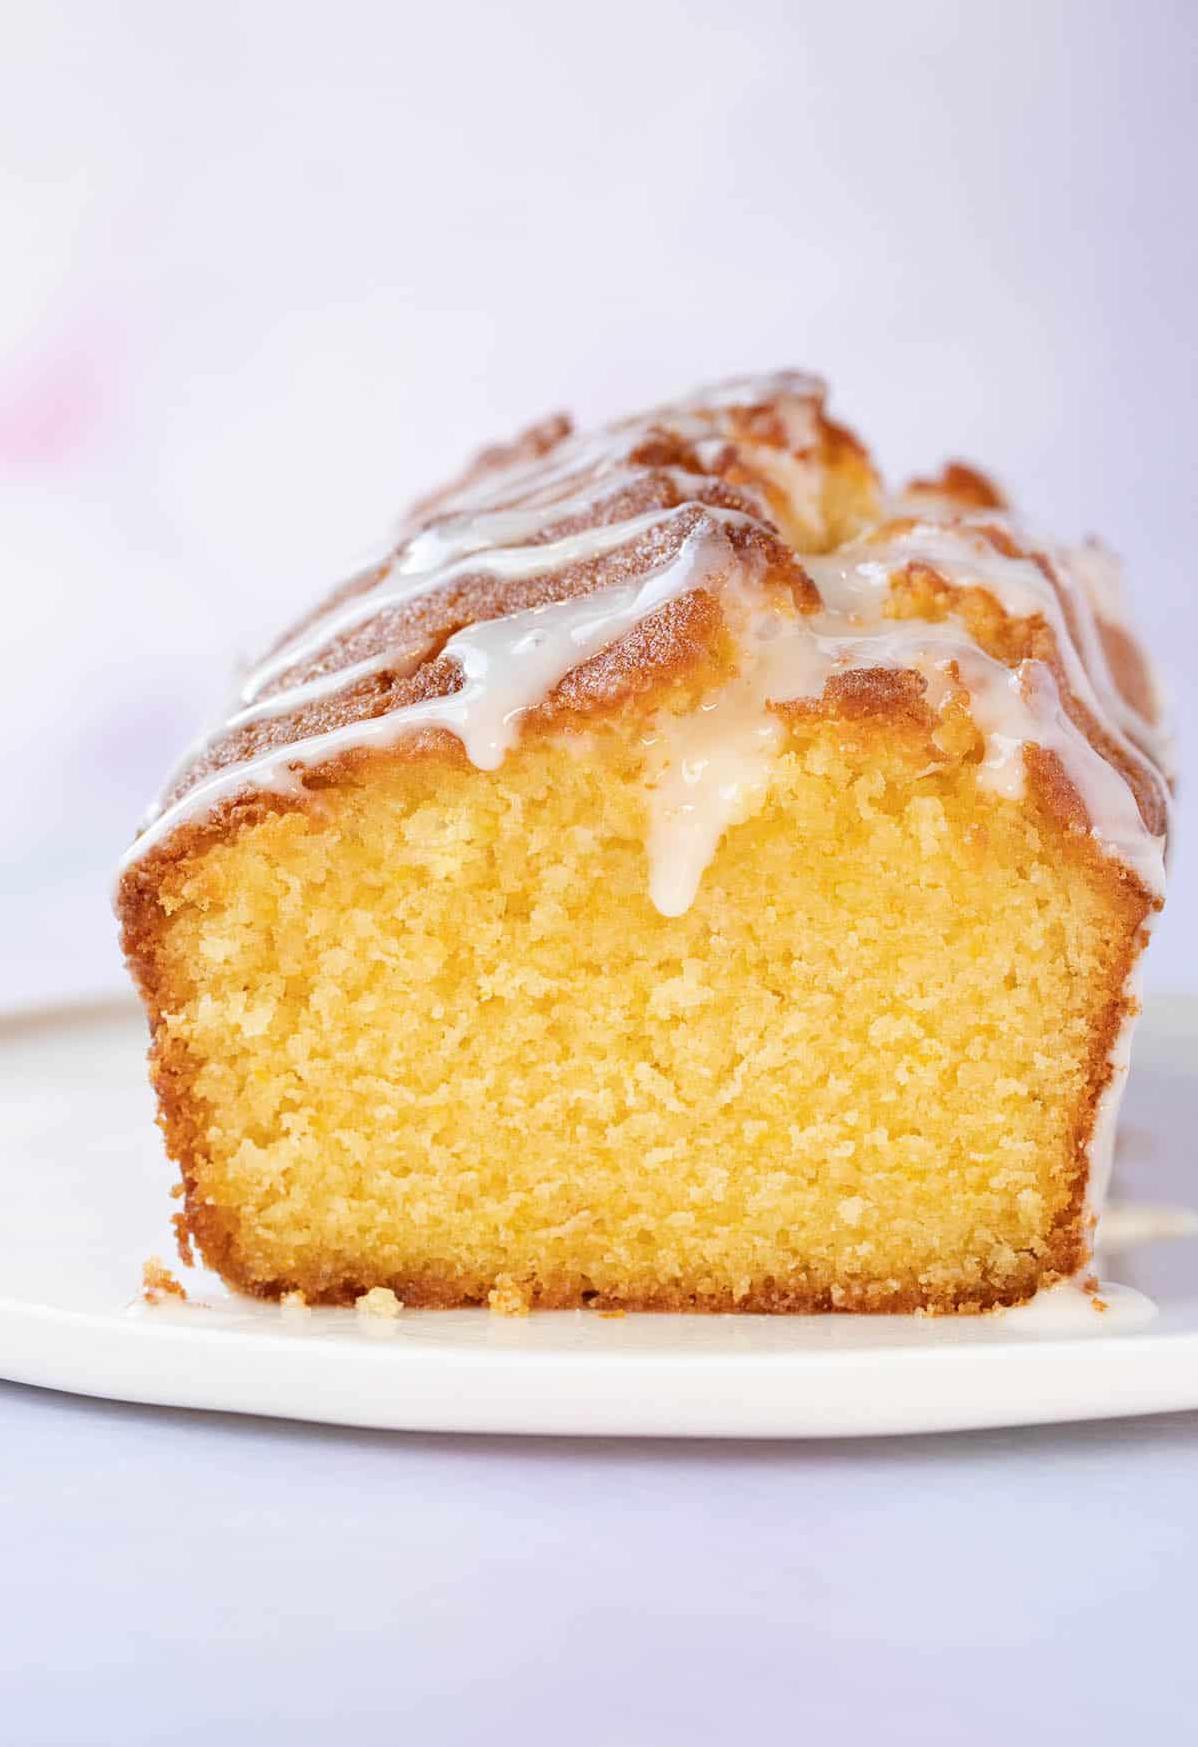  The perfect balance of citrusy orange and buttery richness in every slice.